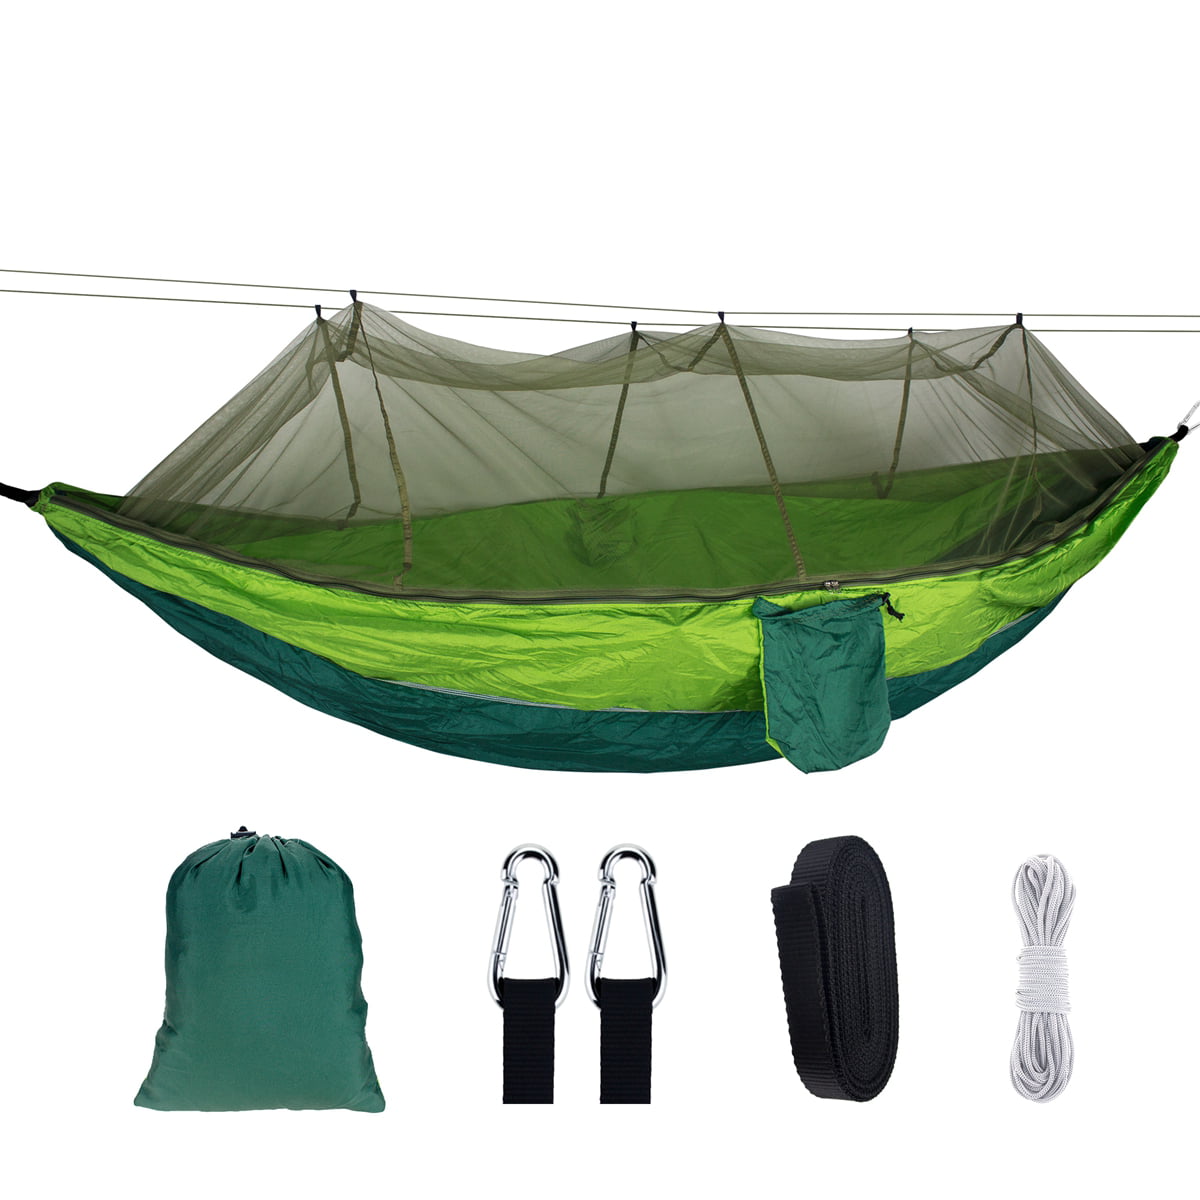 Portable Hammock Bed Anti-Mosquito Net Outdoor Hanging Swinging Camping Travel 